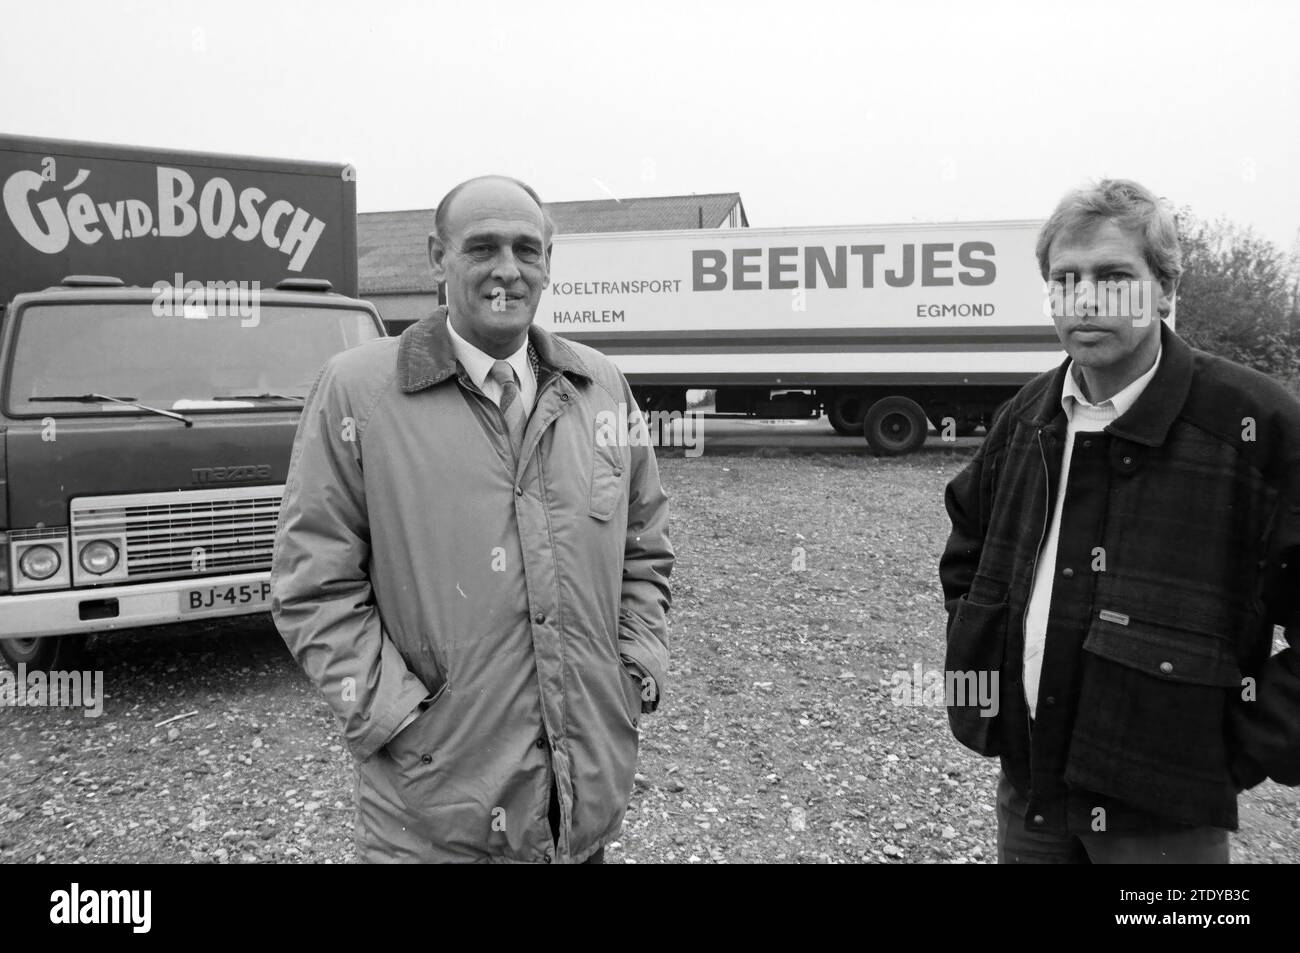 Fa. van de Bosch, gentlemen van de Bosch, Transport, transport companies, 30-10-1985, Whizgle News from the Past, Tailored for the Future. Explore historical narratives, Dutch The Netherlands agency image with a modern perspective, bridging the gap between yesterday's events and tomorrow's insights. A timeless journey shaping the stories that shape our future. Stock Photo